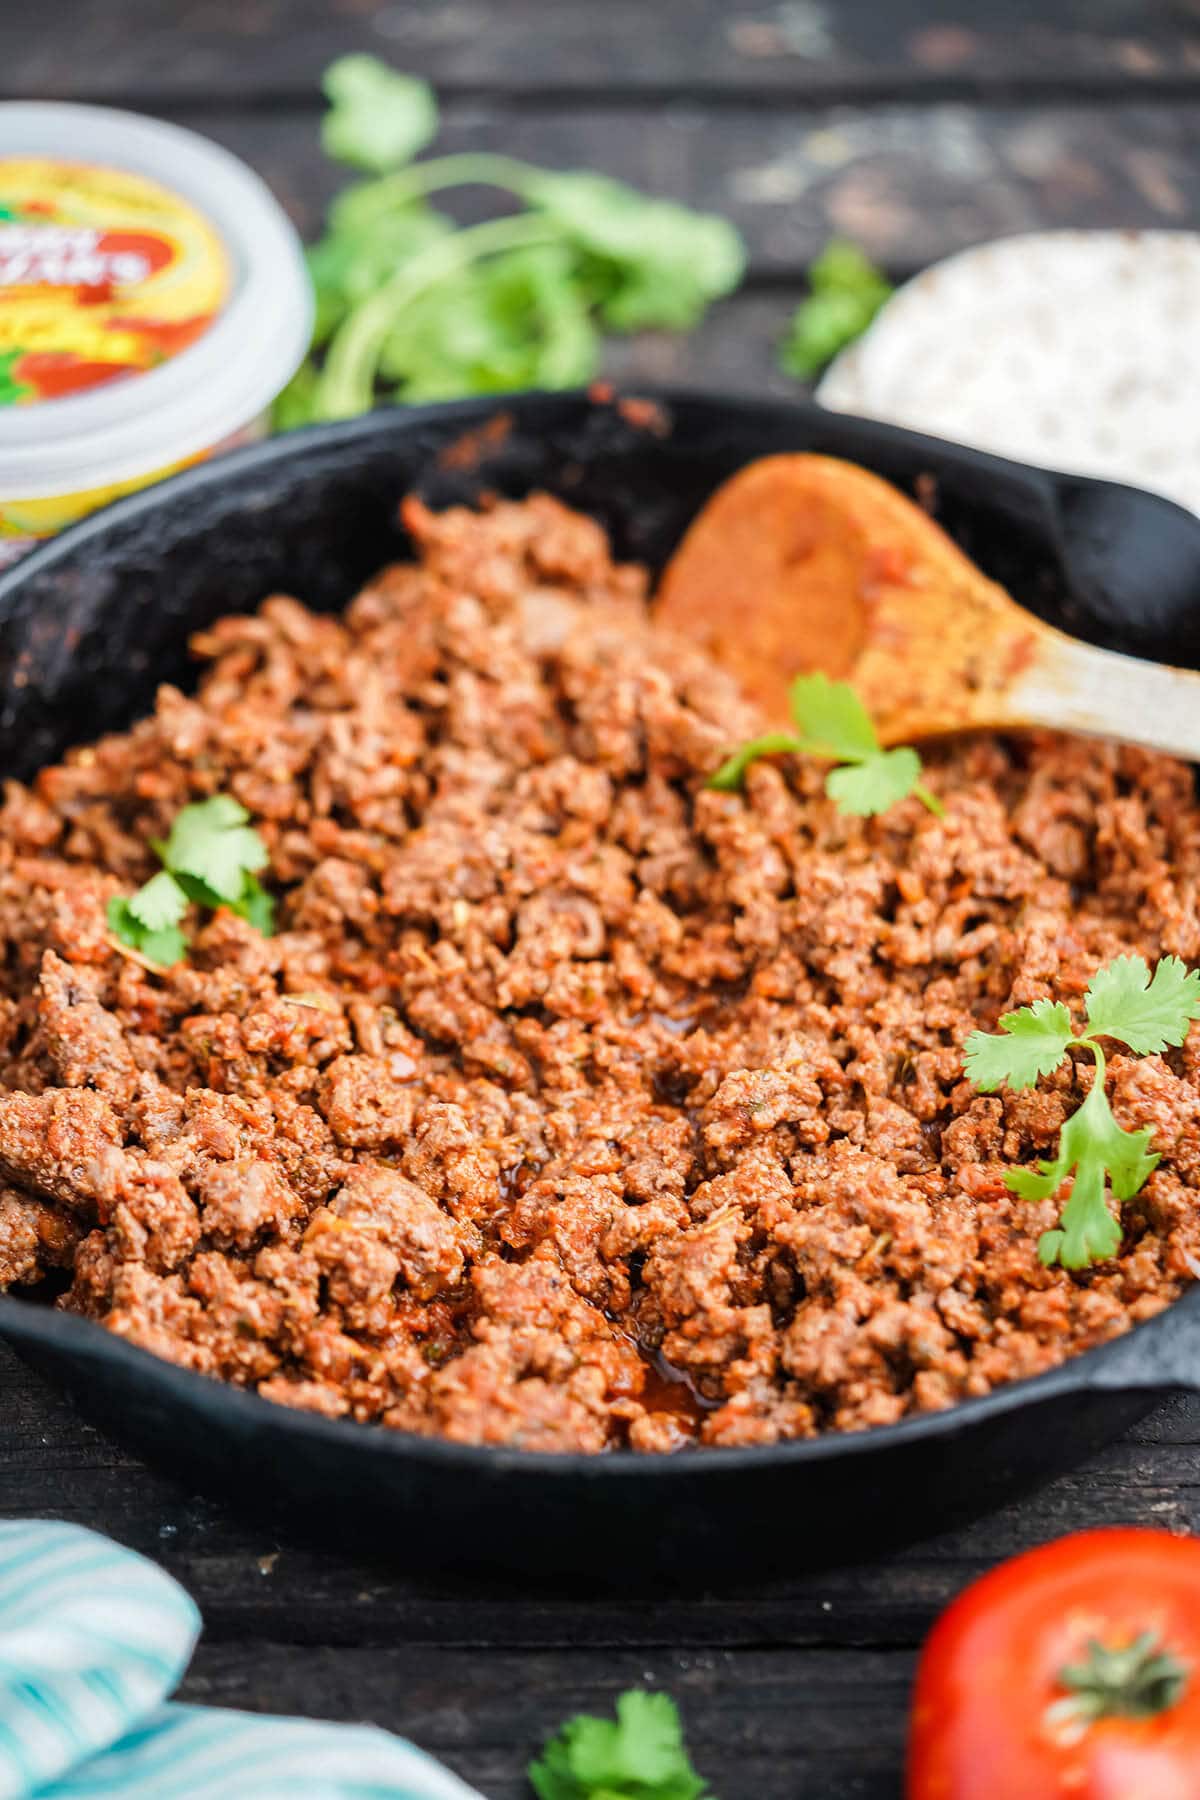 Brown ground beef in cast iron skillet seasoning with taco mix.